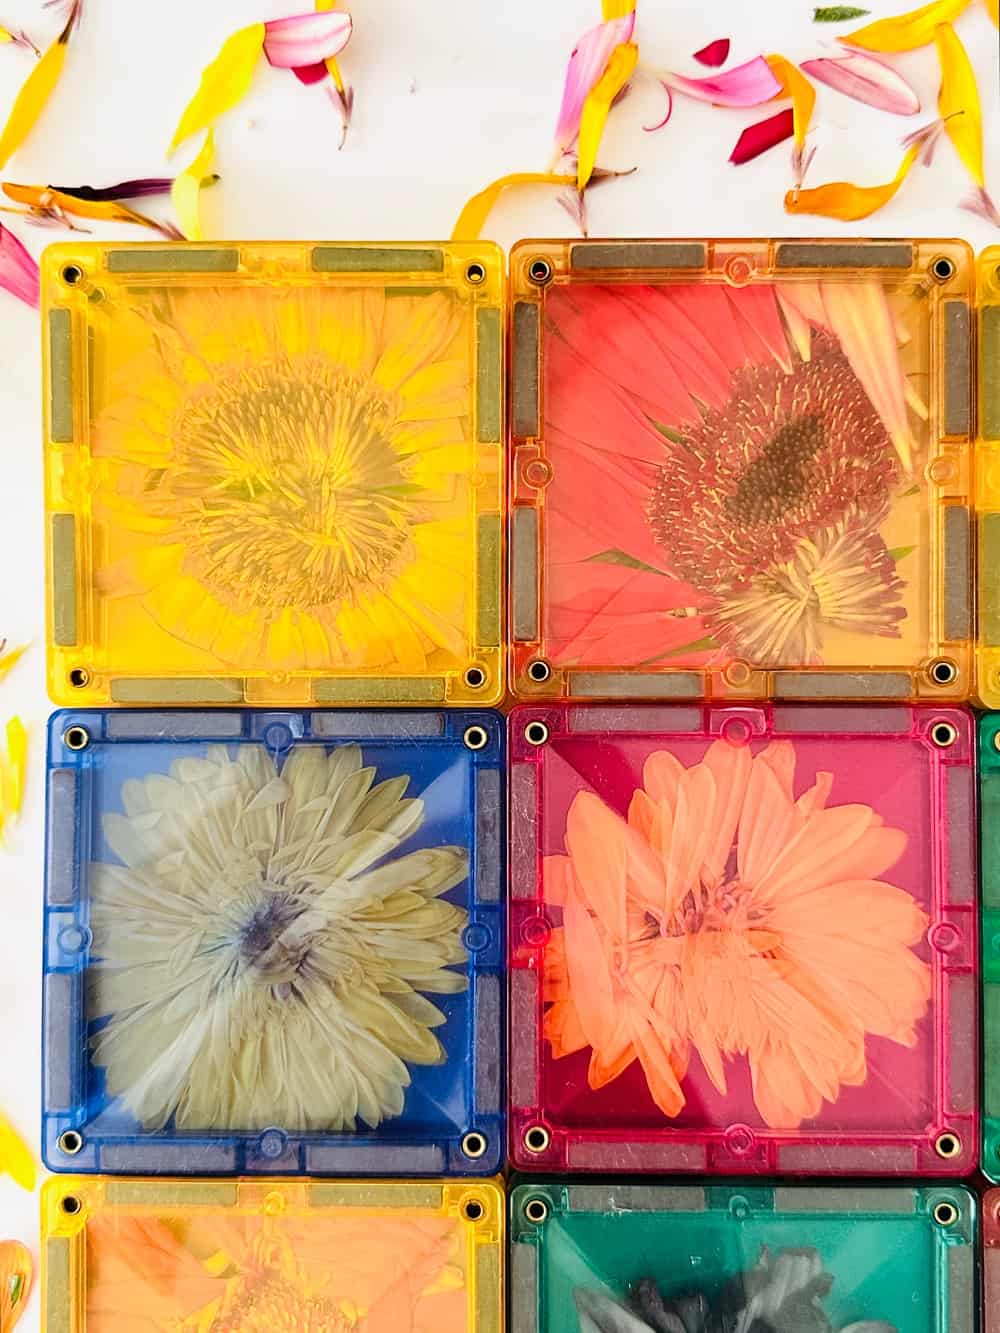 magnet tile flowers play activity for kids